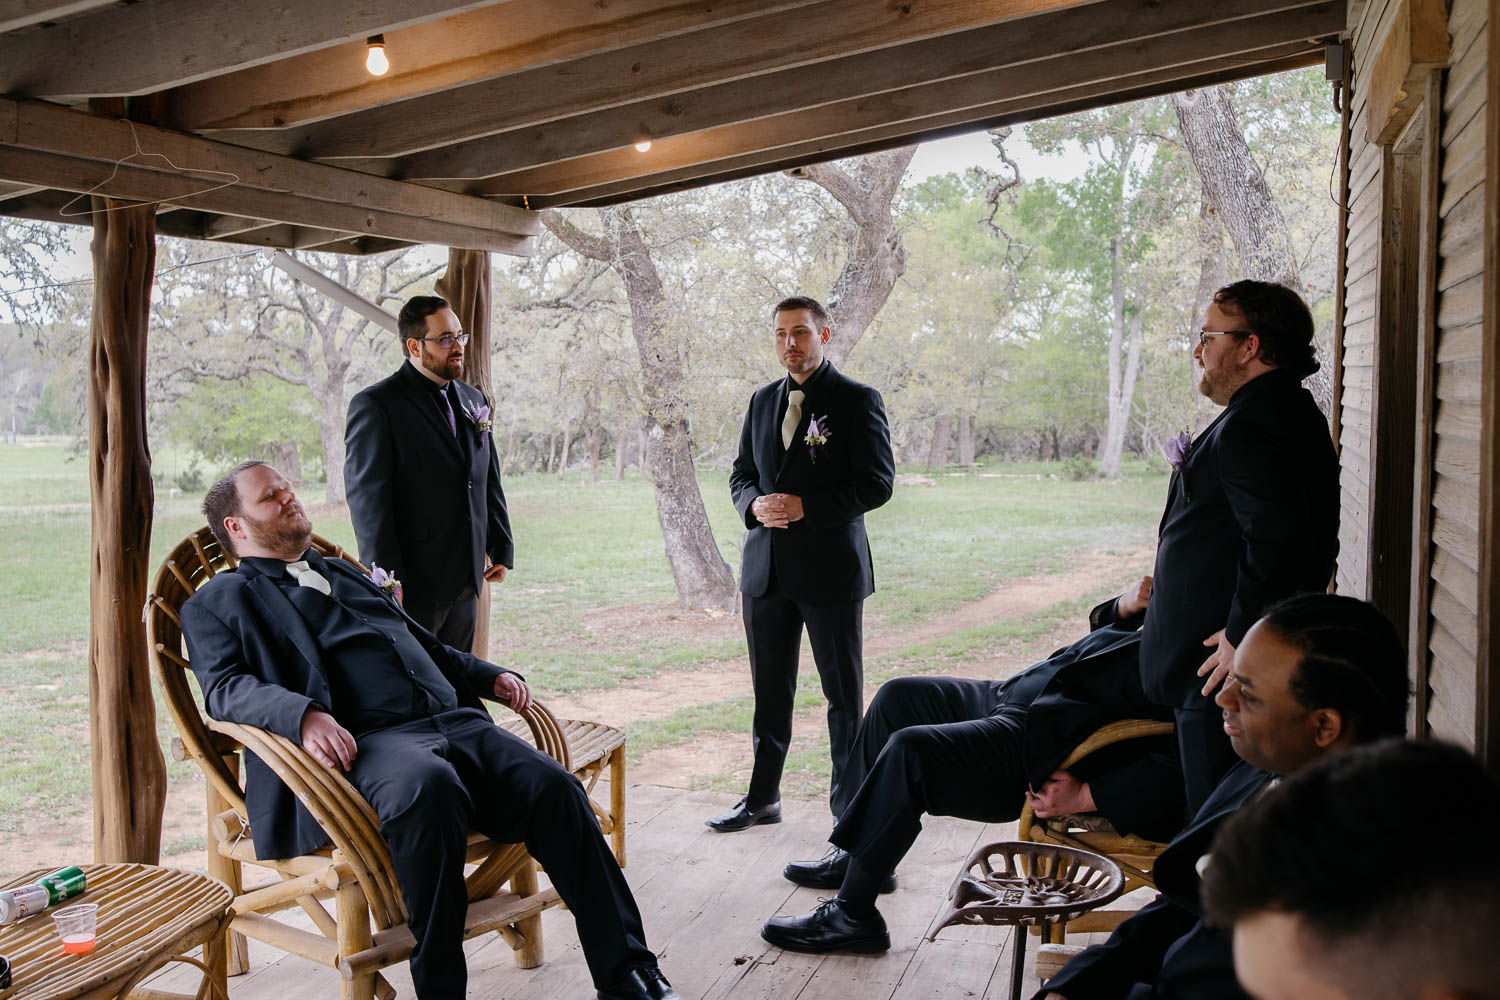 015 Eagle Dancer Ranch Boerne Hill Country Wedding+Reception Philip Thomas Photography